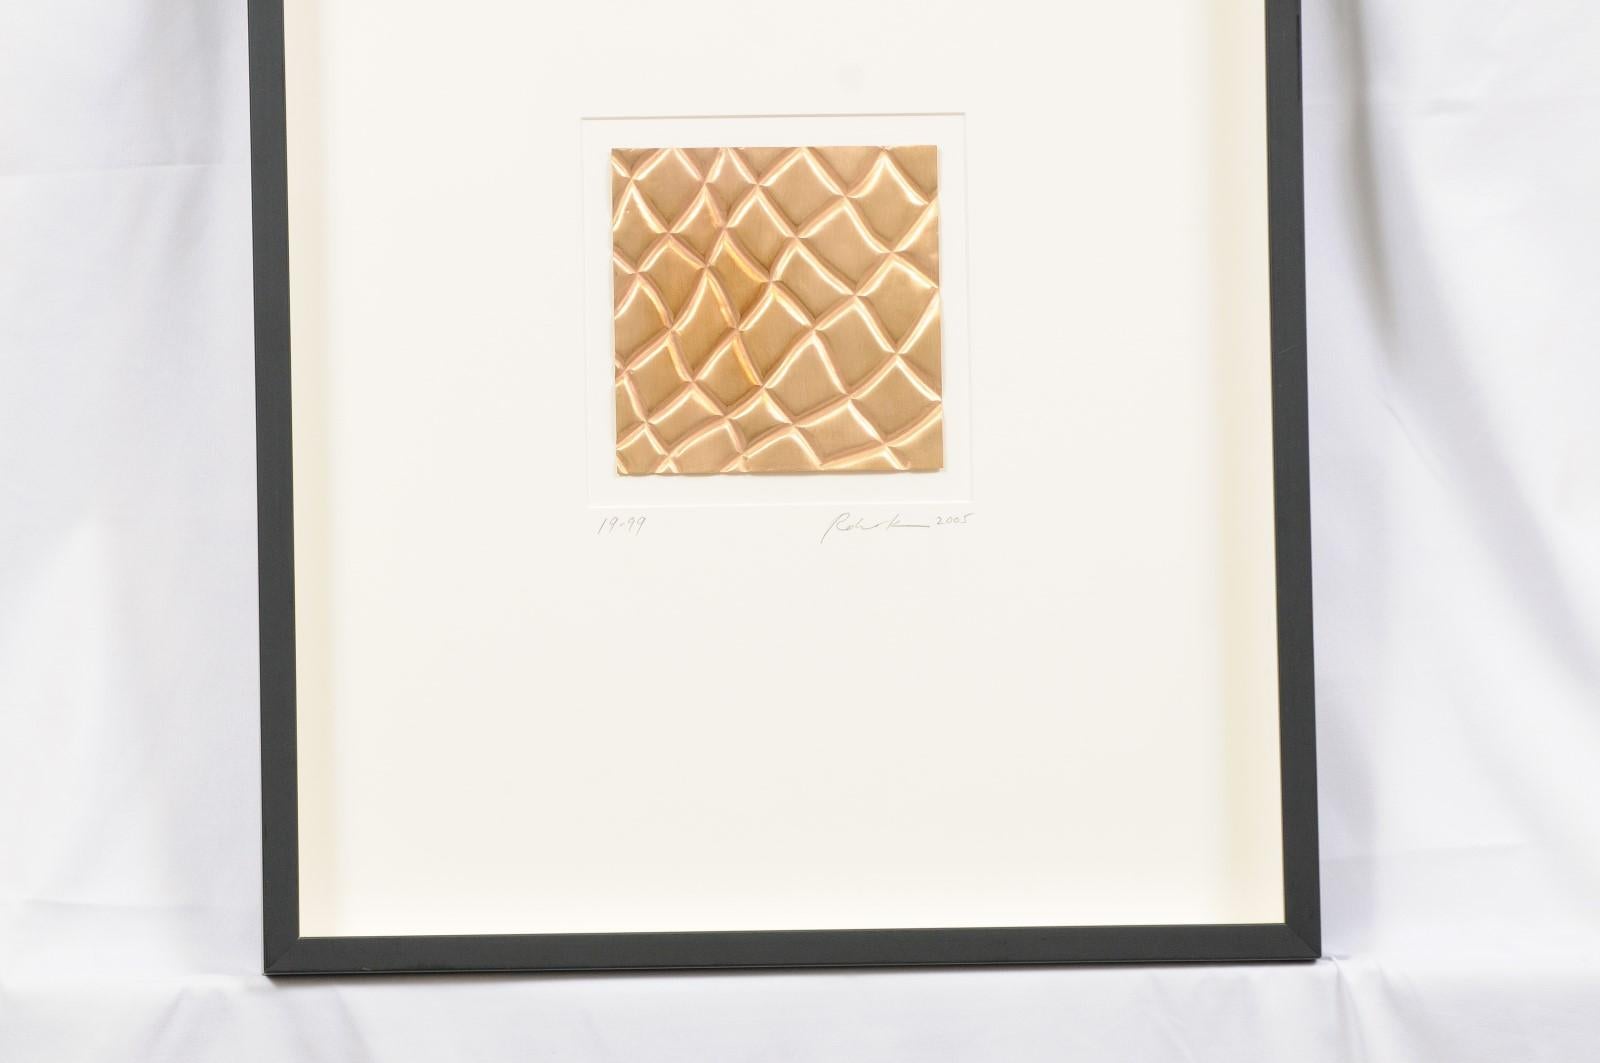 Other Black Framed Square Gold Textured Art - Robert Kuo For Sale